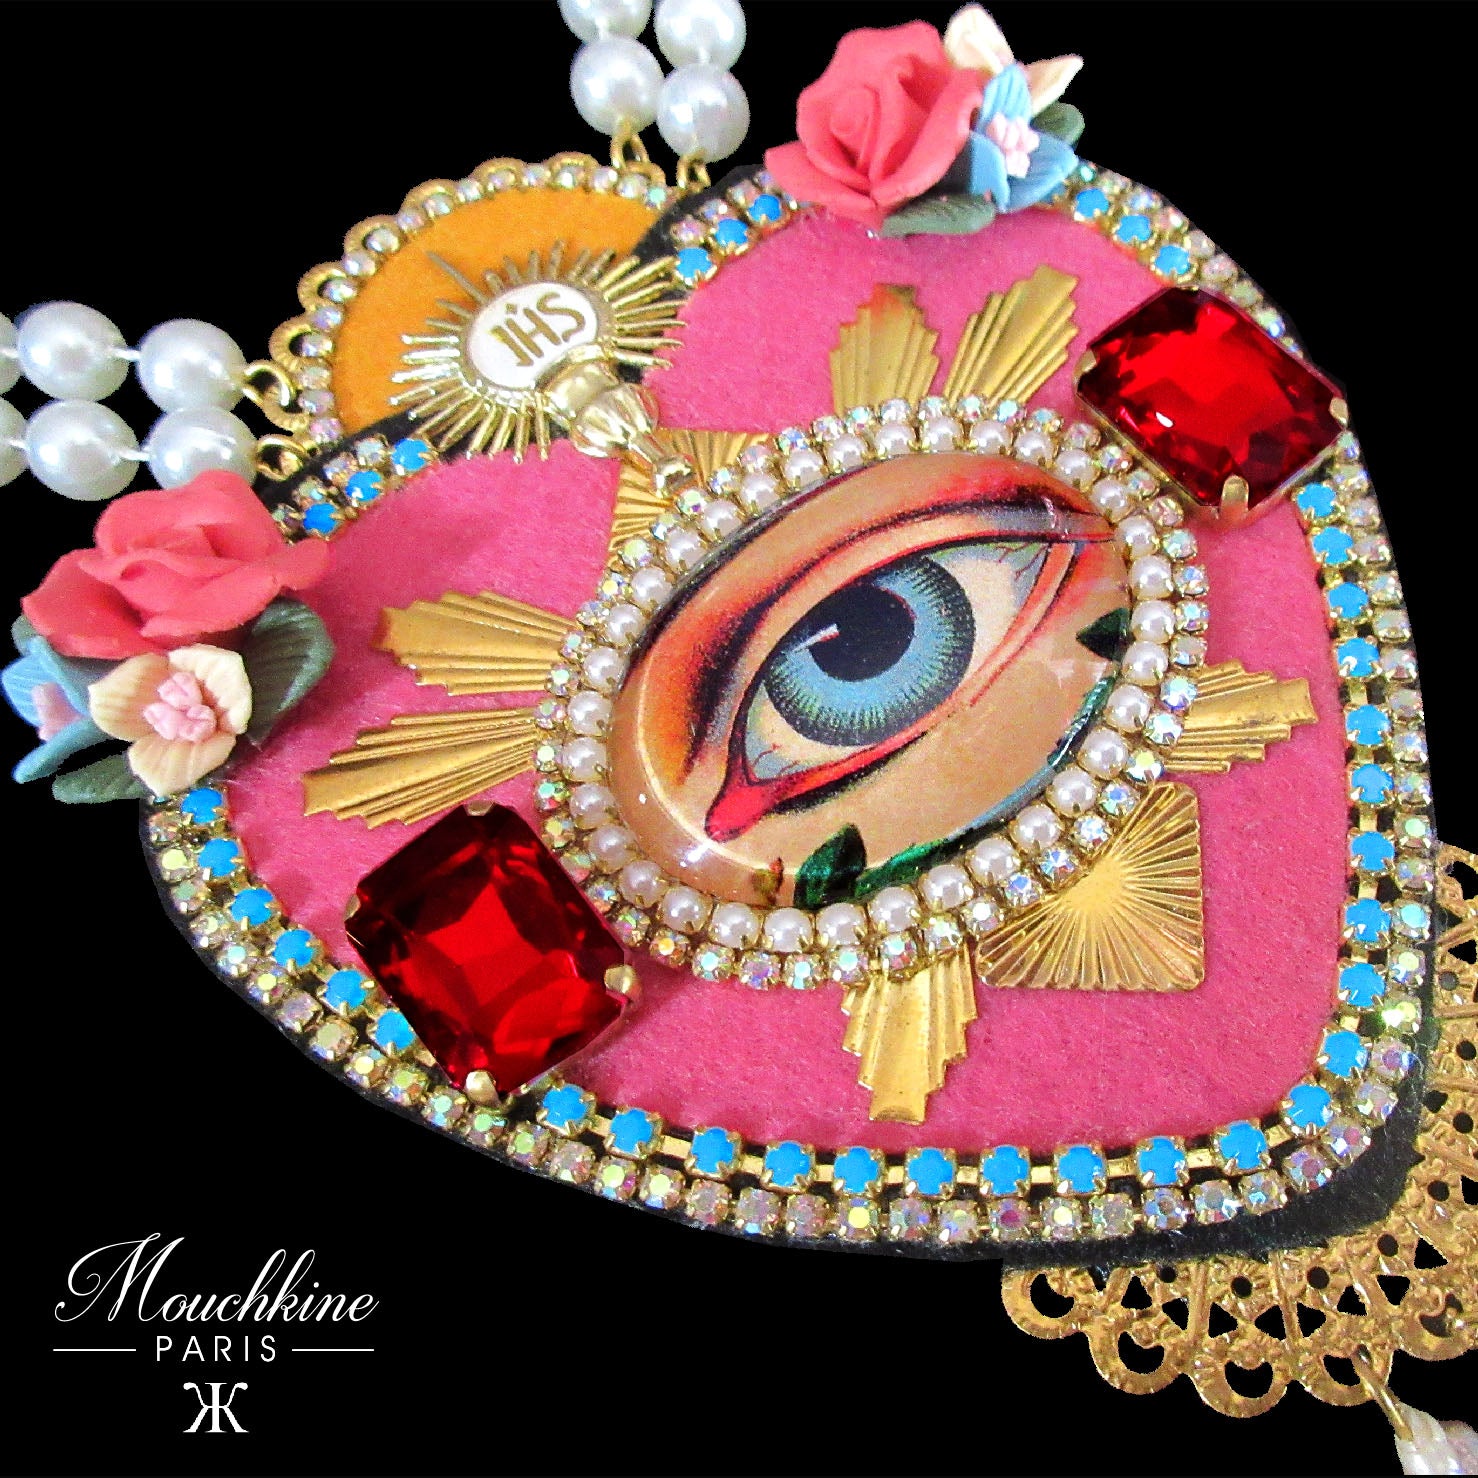 mouchkine jewelry luxury handmade in france pink heart with antique eye necklace